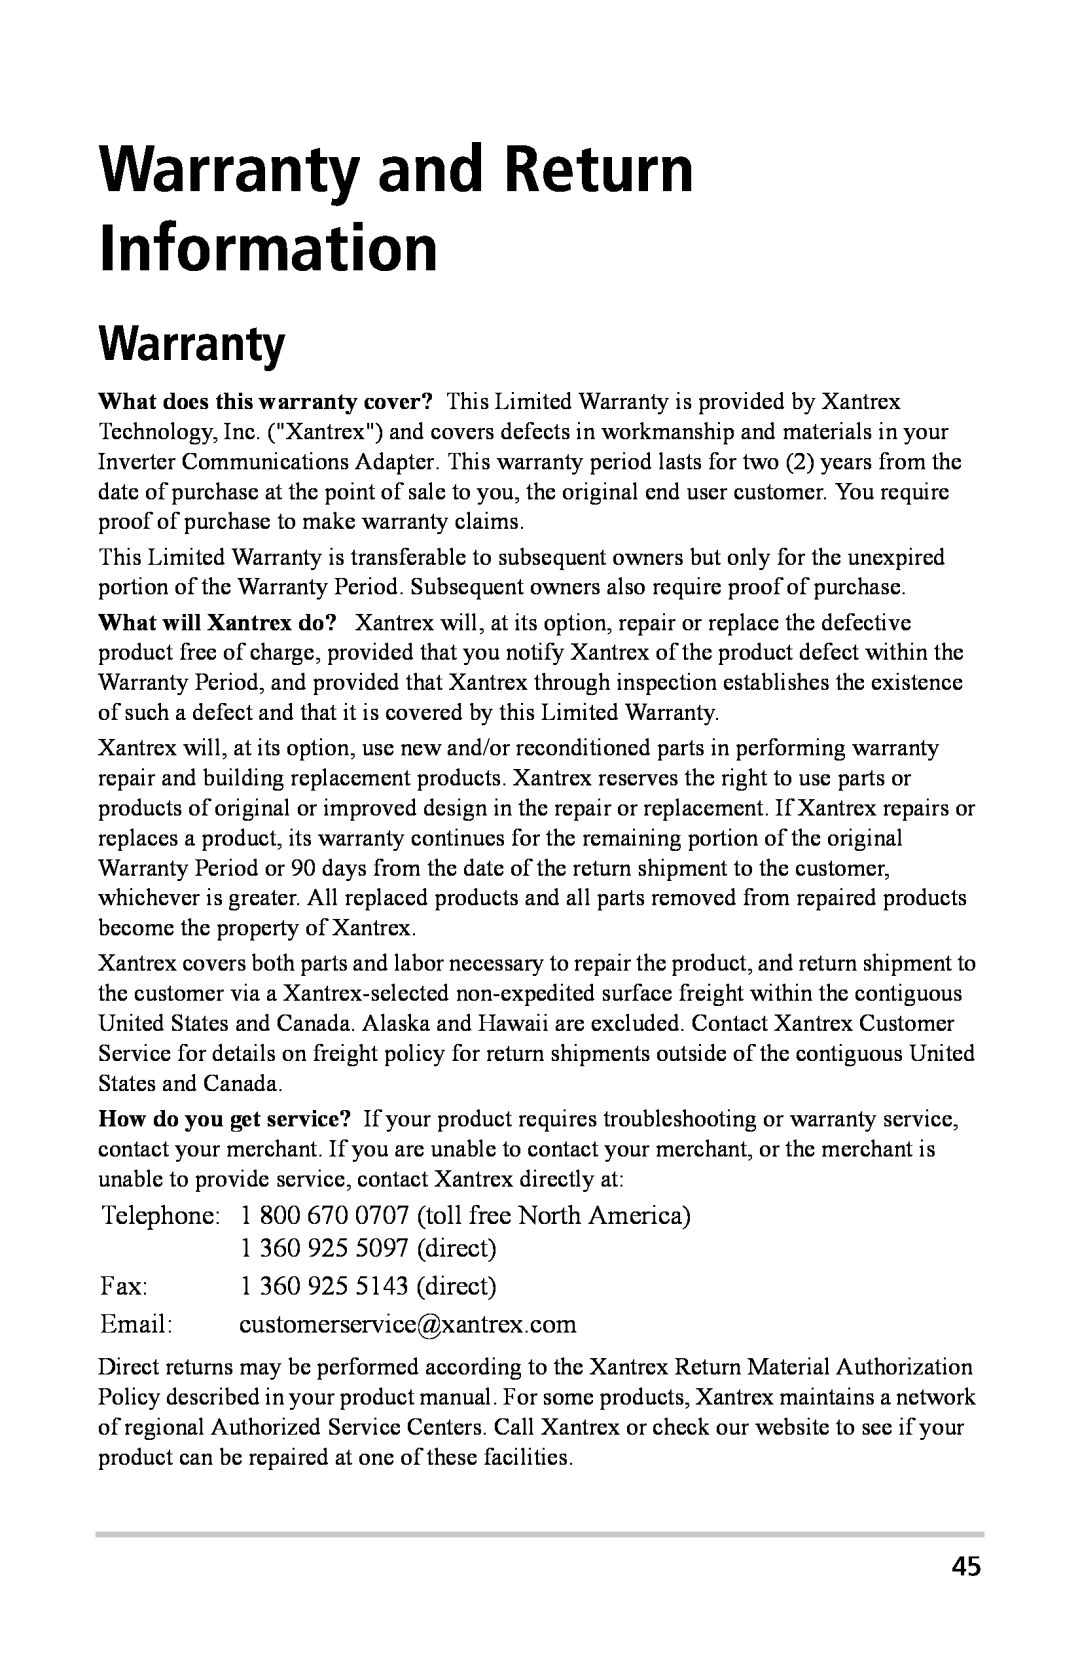 Xantrex Technology Inverter Communications Adapter manual Warranty and Return Information 